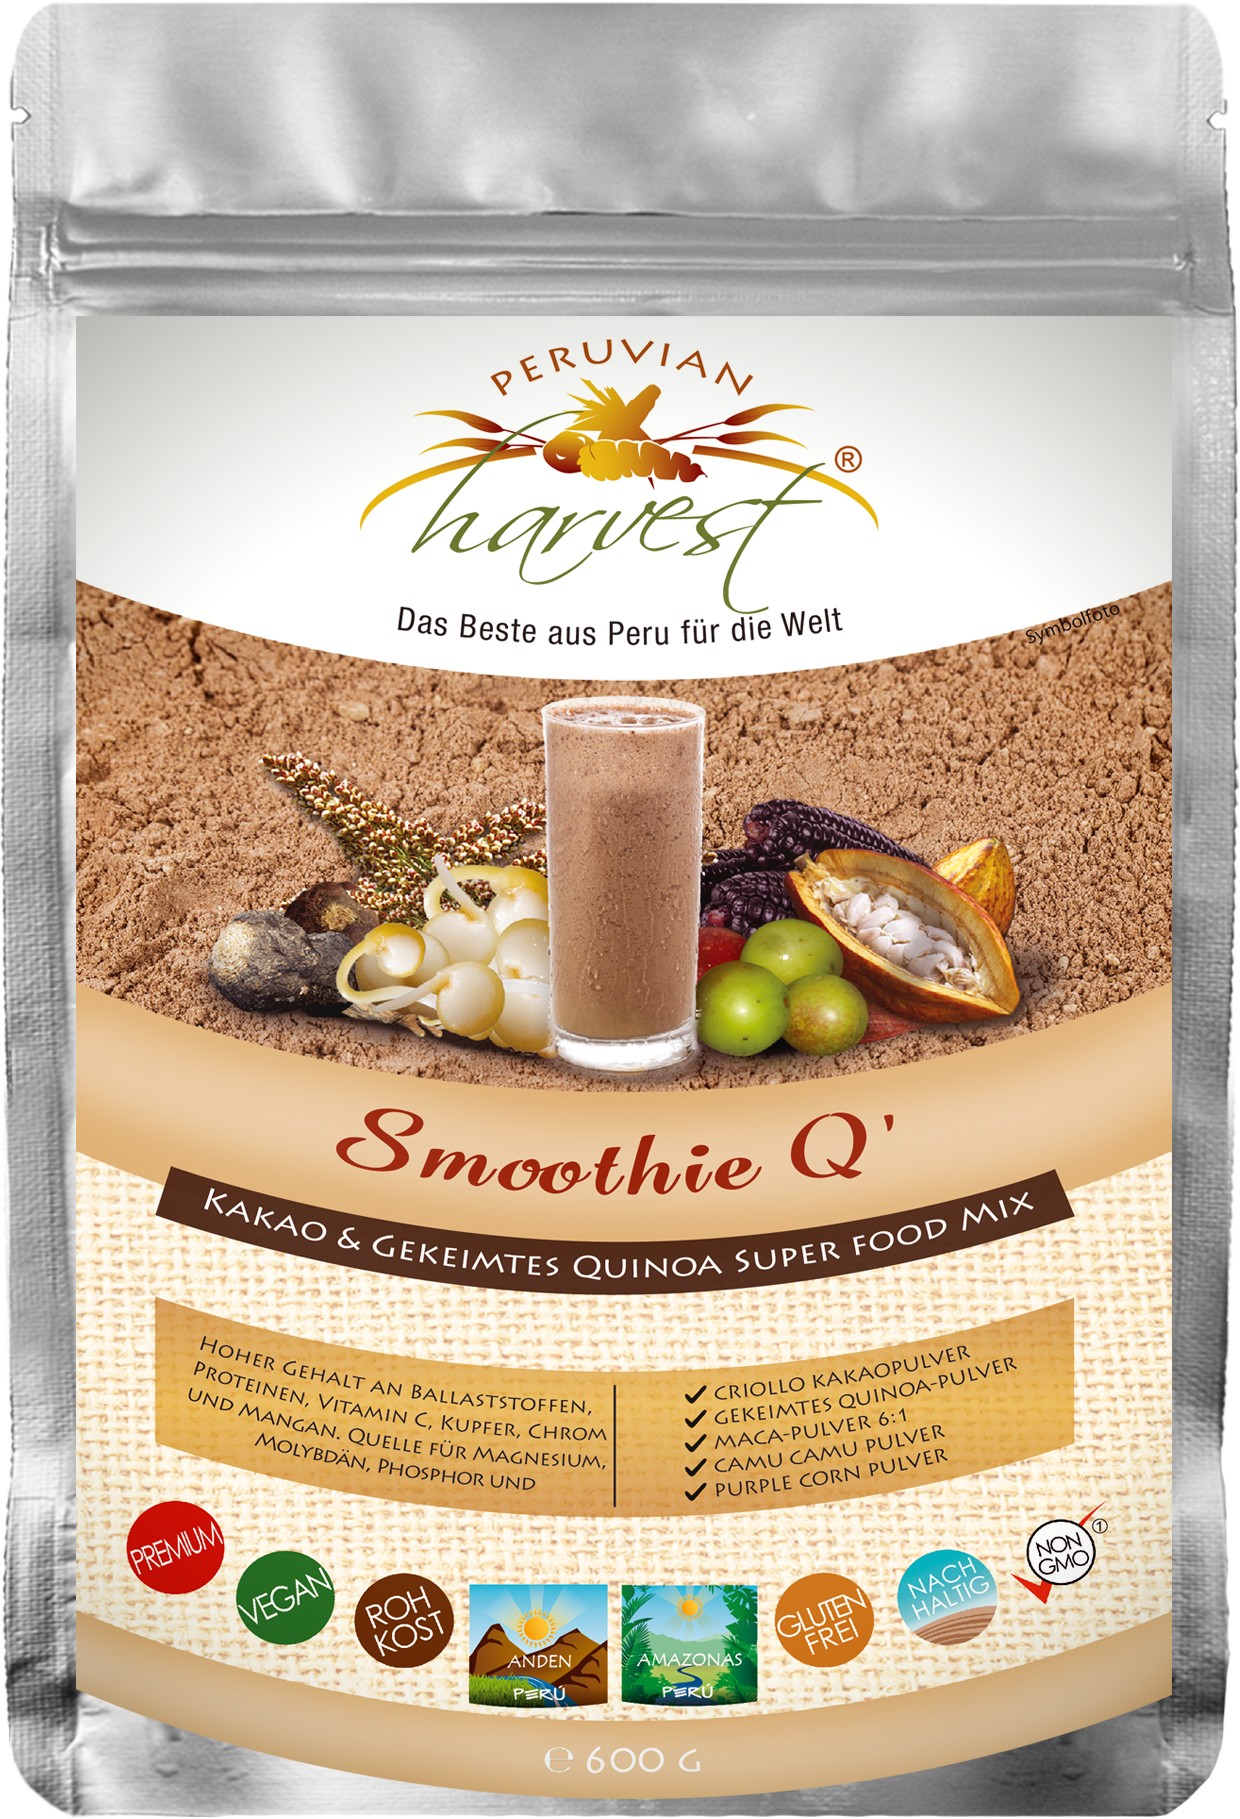 Smoothie Q - Superfood Mix, 600 g